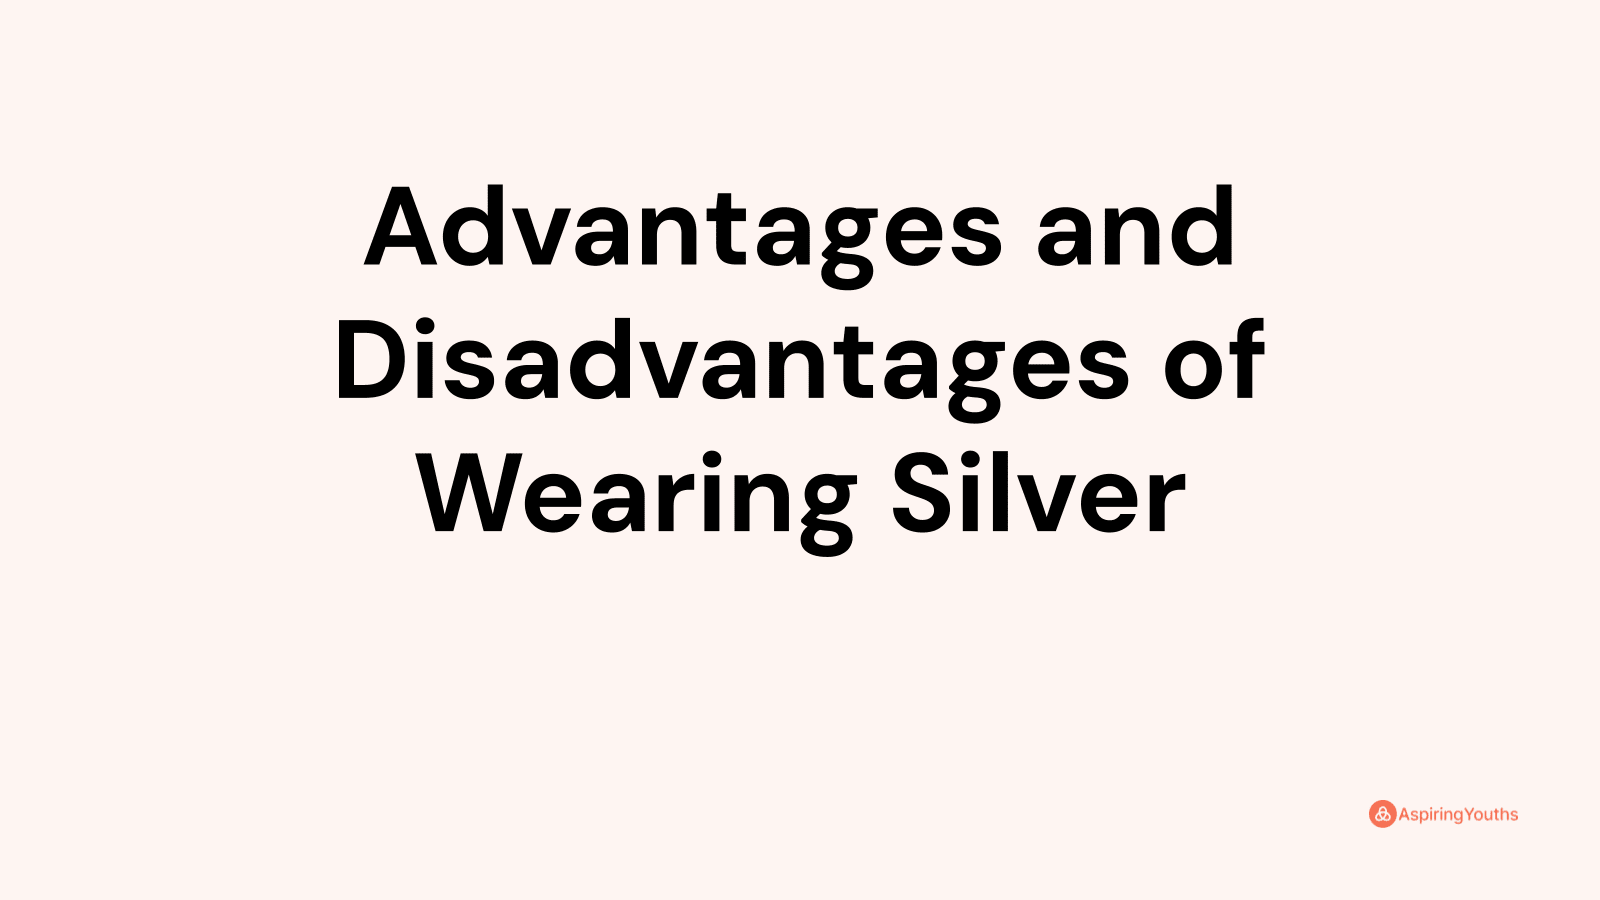 Advantages and disadvantages of Wearing Silver